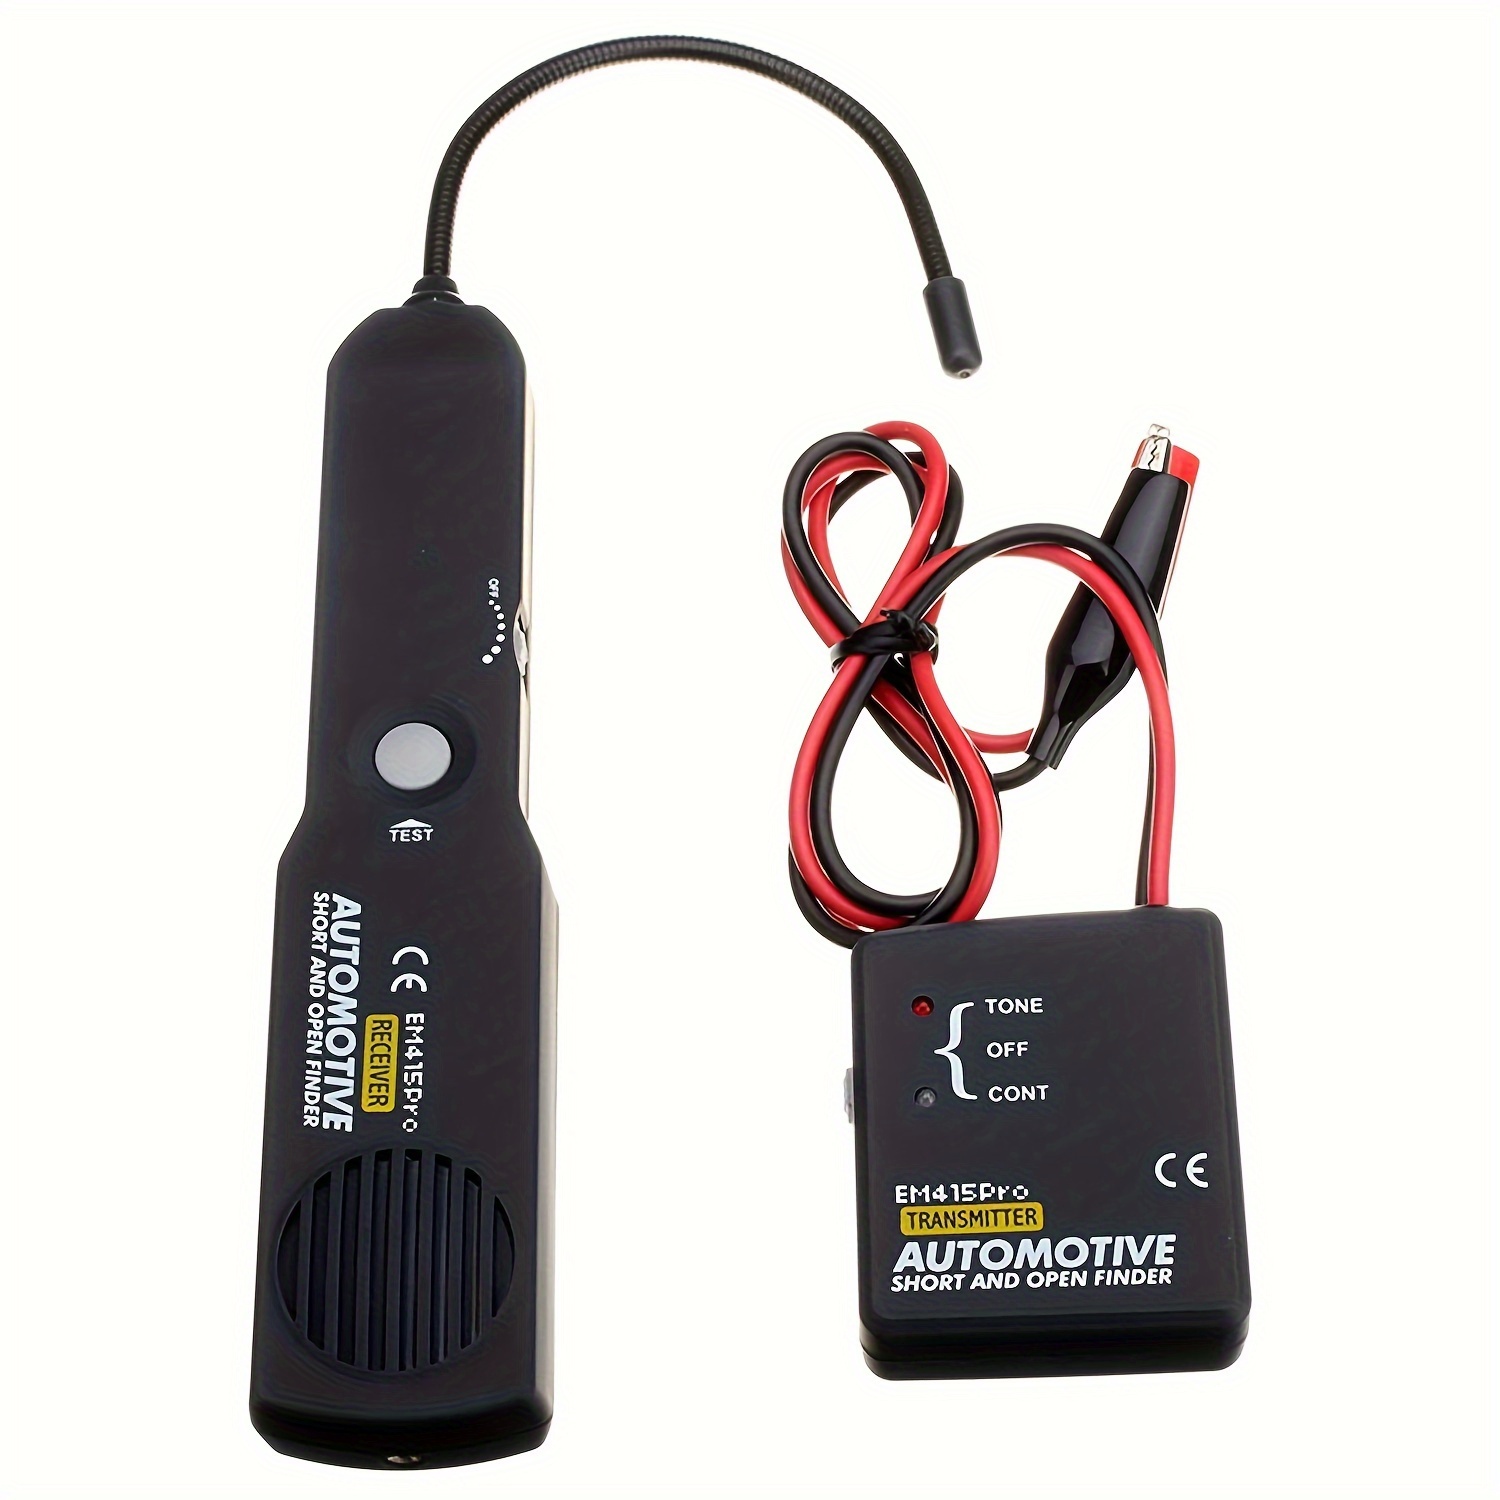 

Mythtiger Car Diagnostic Tool Kit - 9v Battery-powered, Non-rechargeable, For Electrical Route Tracing & Circuit Testing